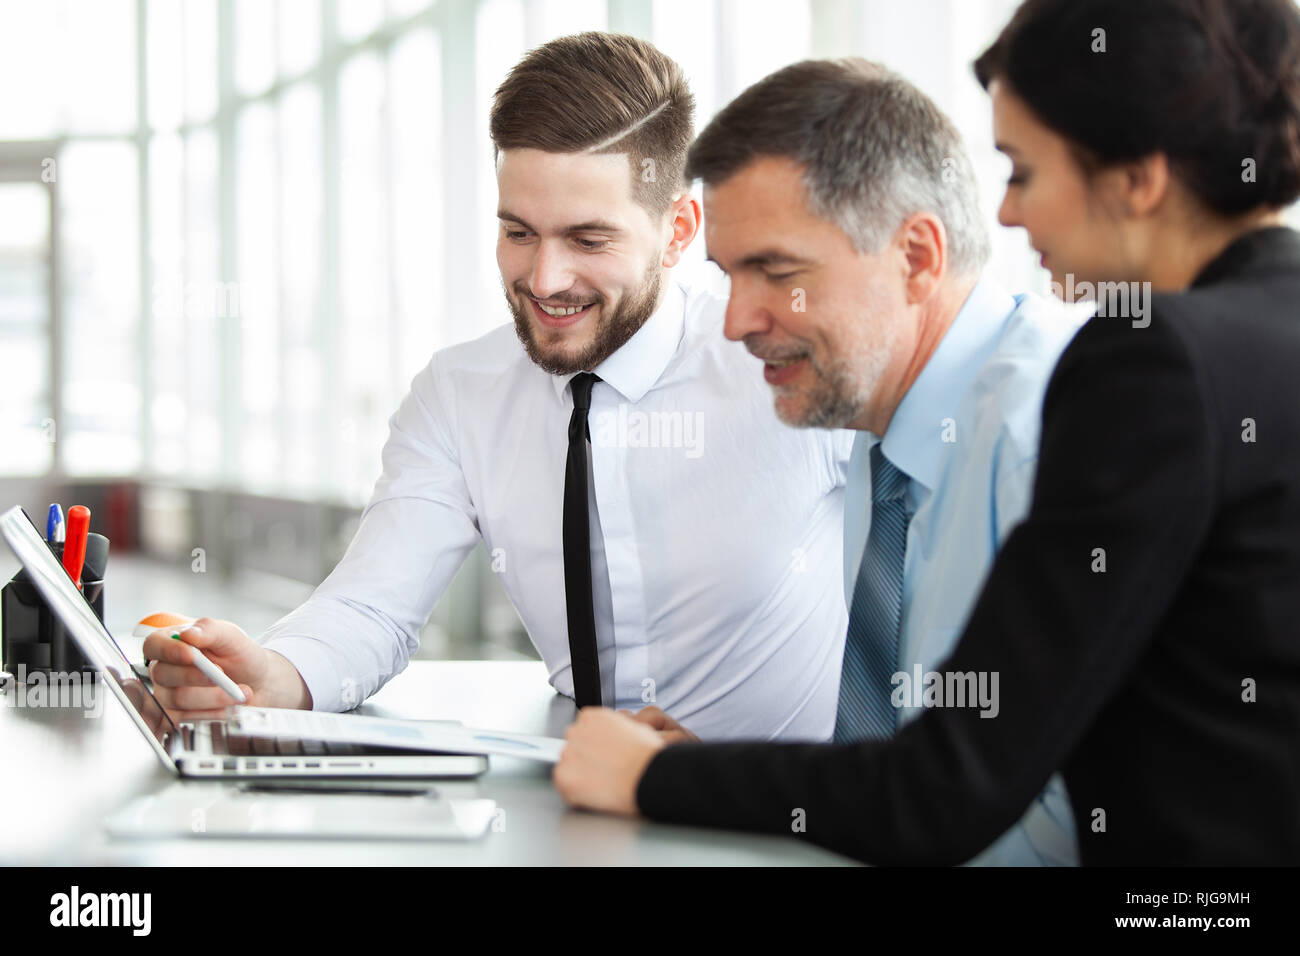 Working together. Business Team Discussion Meeting Corporate Concept. Stock Photo